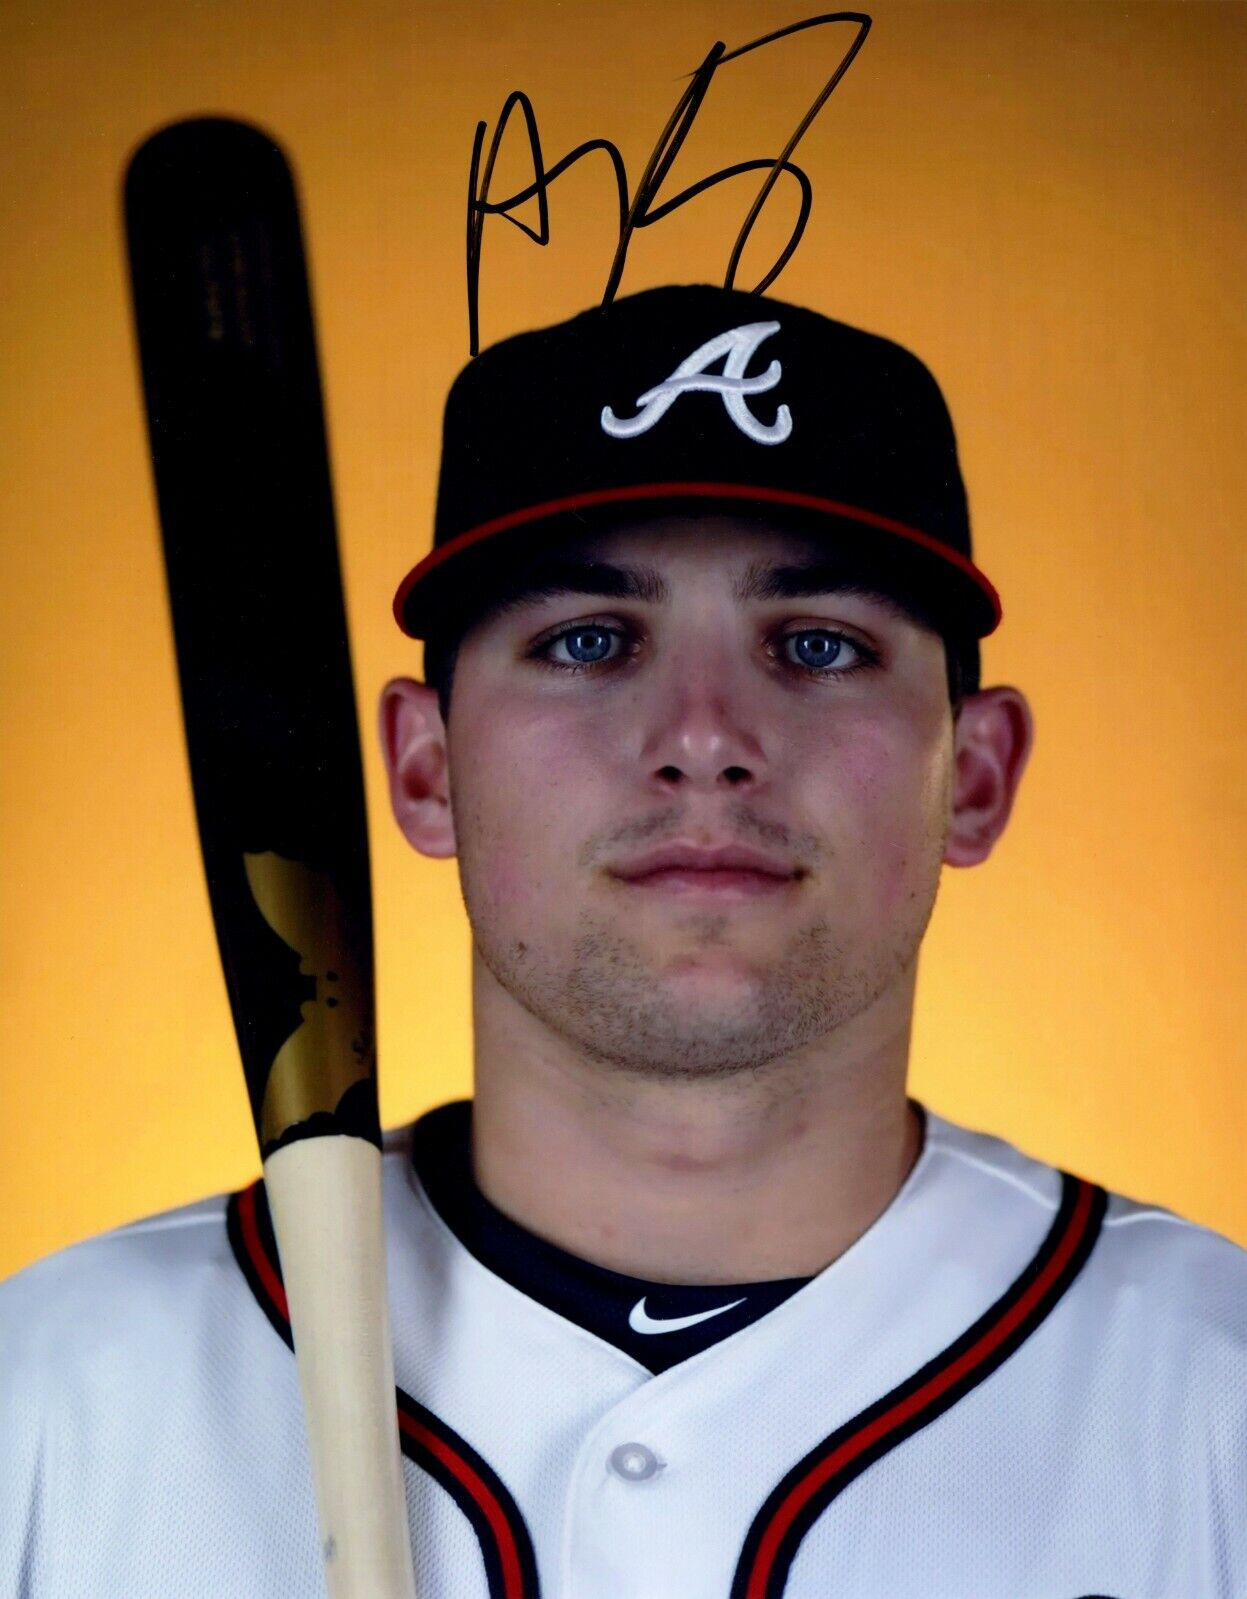 Austin Riley Signed 11x14 Photo Poster painting COA Auto Braves RC Rookie Auto Will Pass PSA HOT